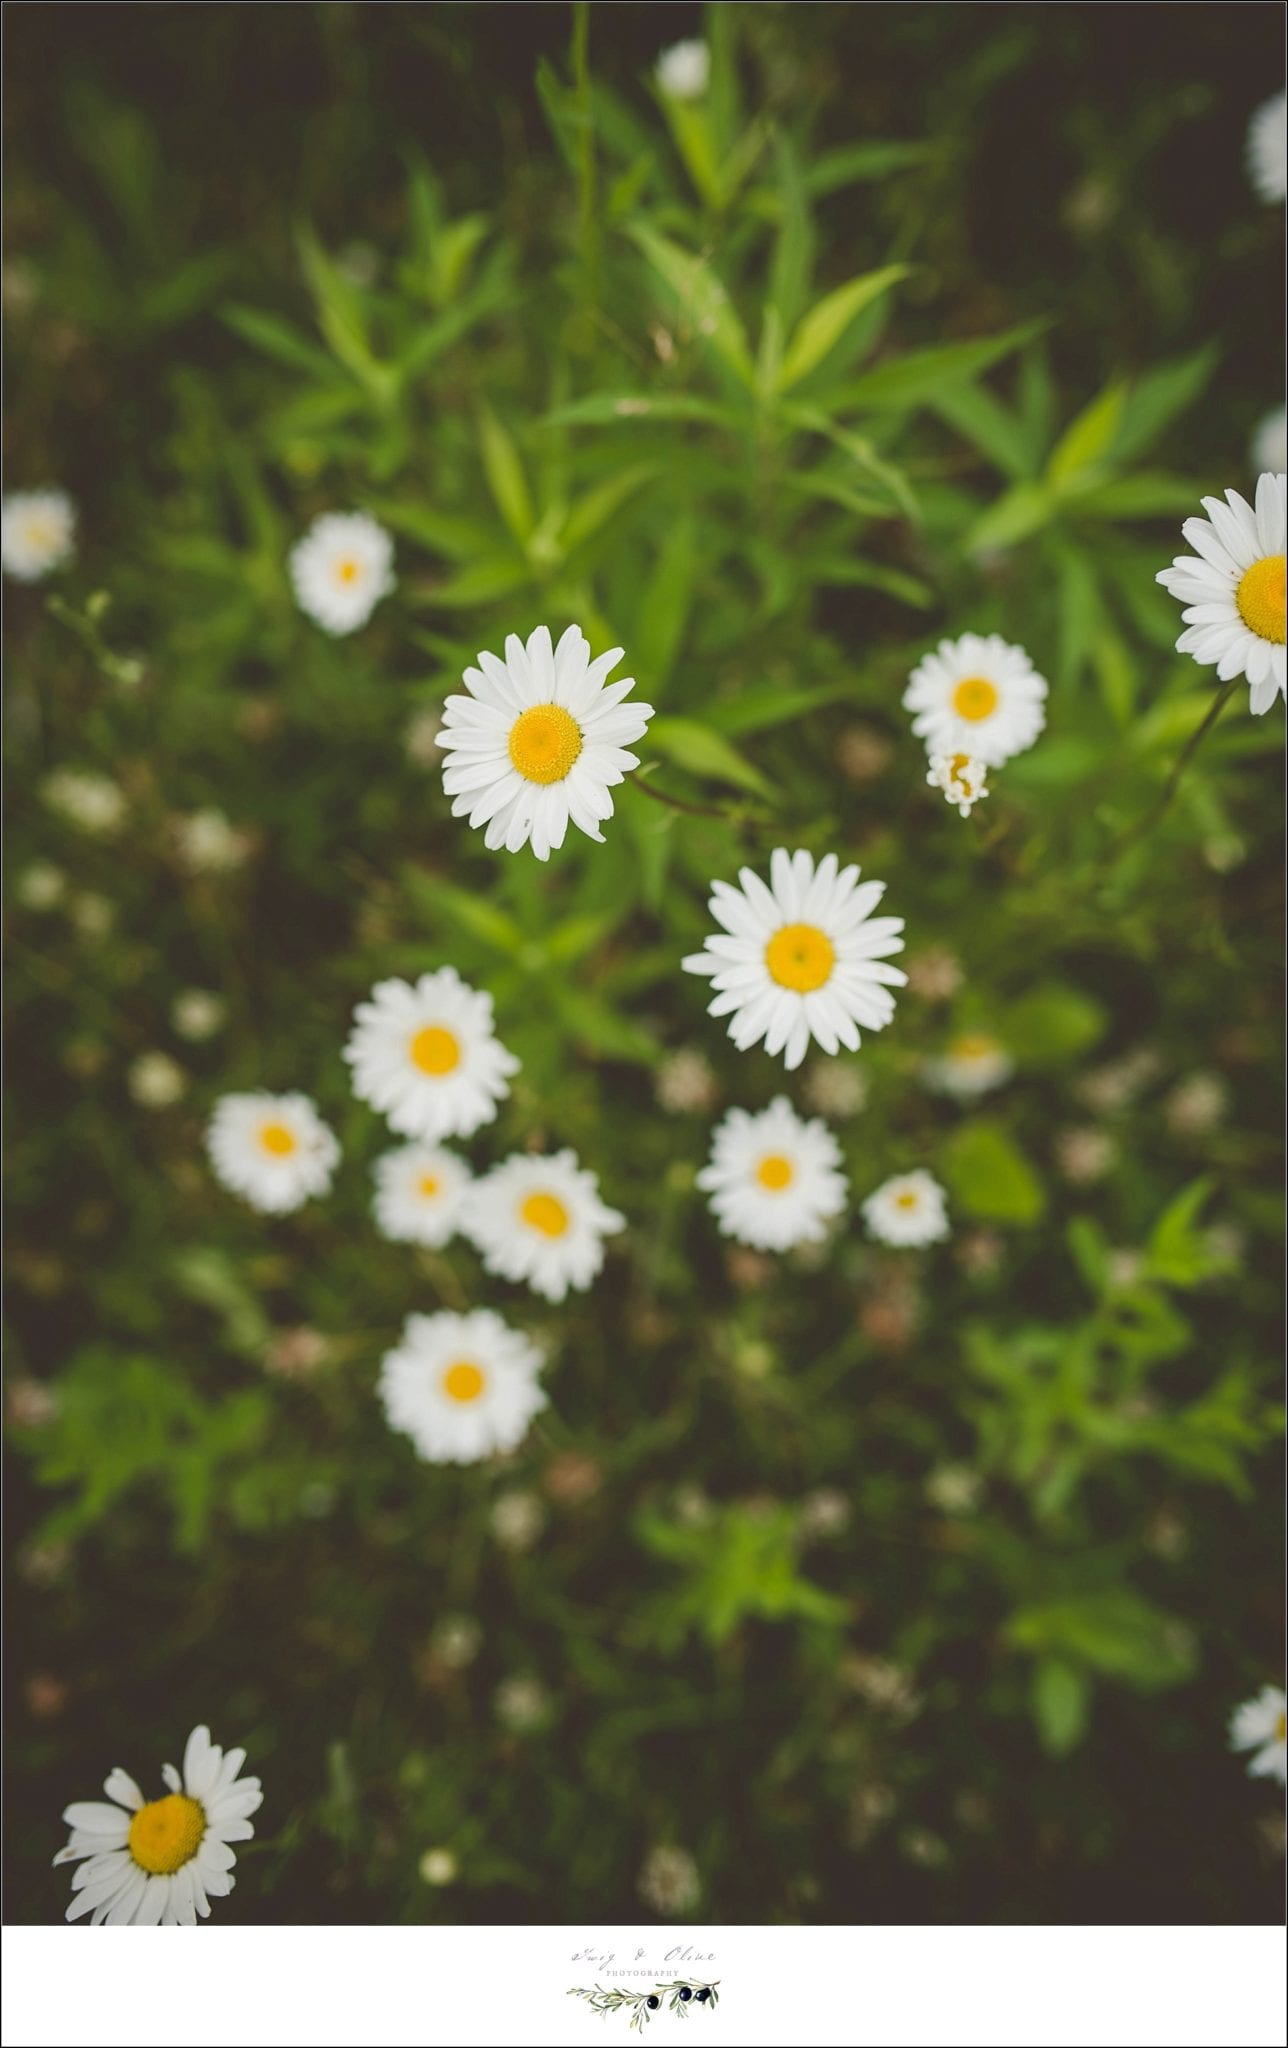 daisies, yellow and white flowers, greenery, Twig and Olive